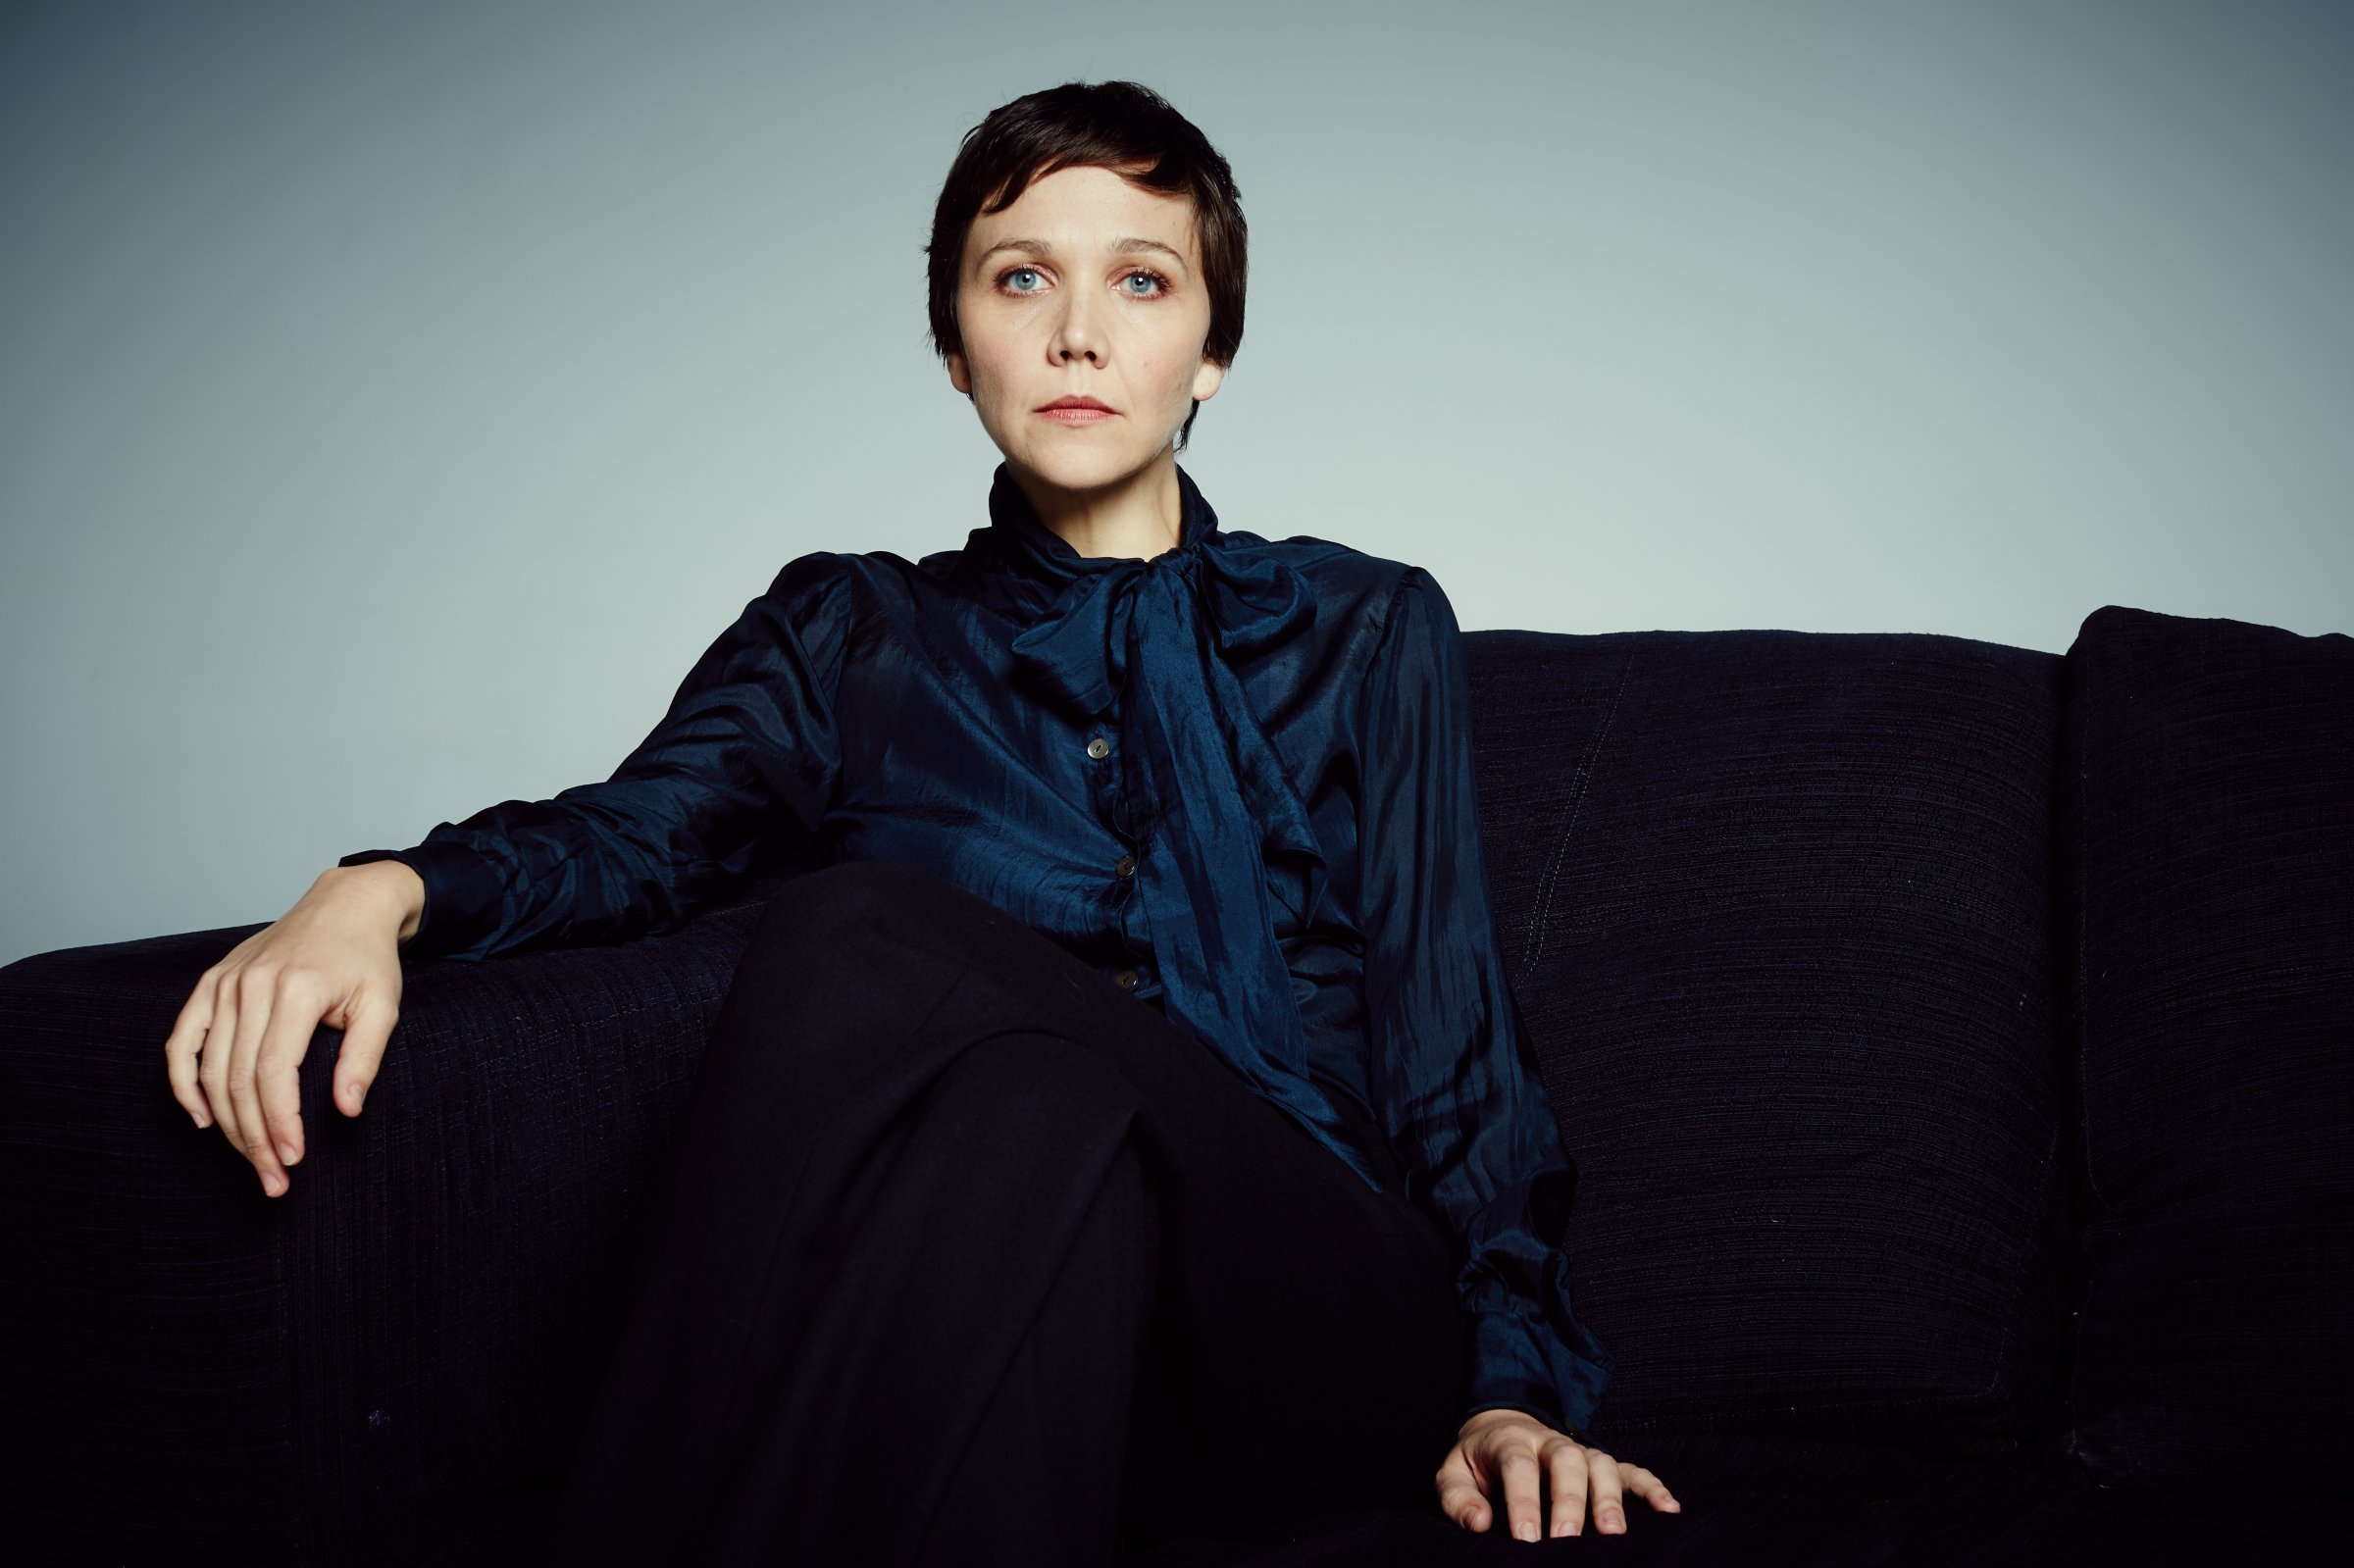 Maggie Gyllenhaal - in the SundanceTV original series "The Honorable Woman" - Photo Credit: Des Willie